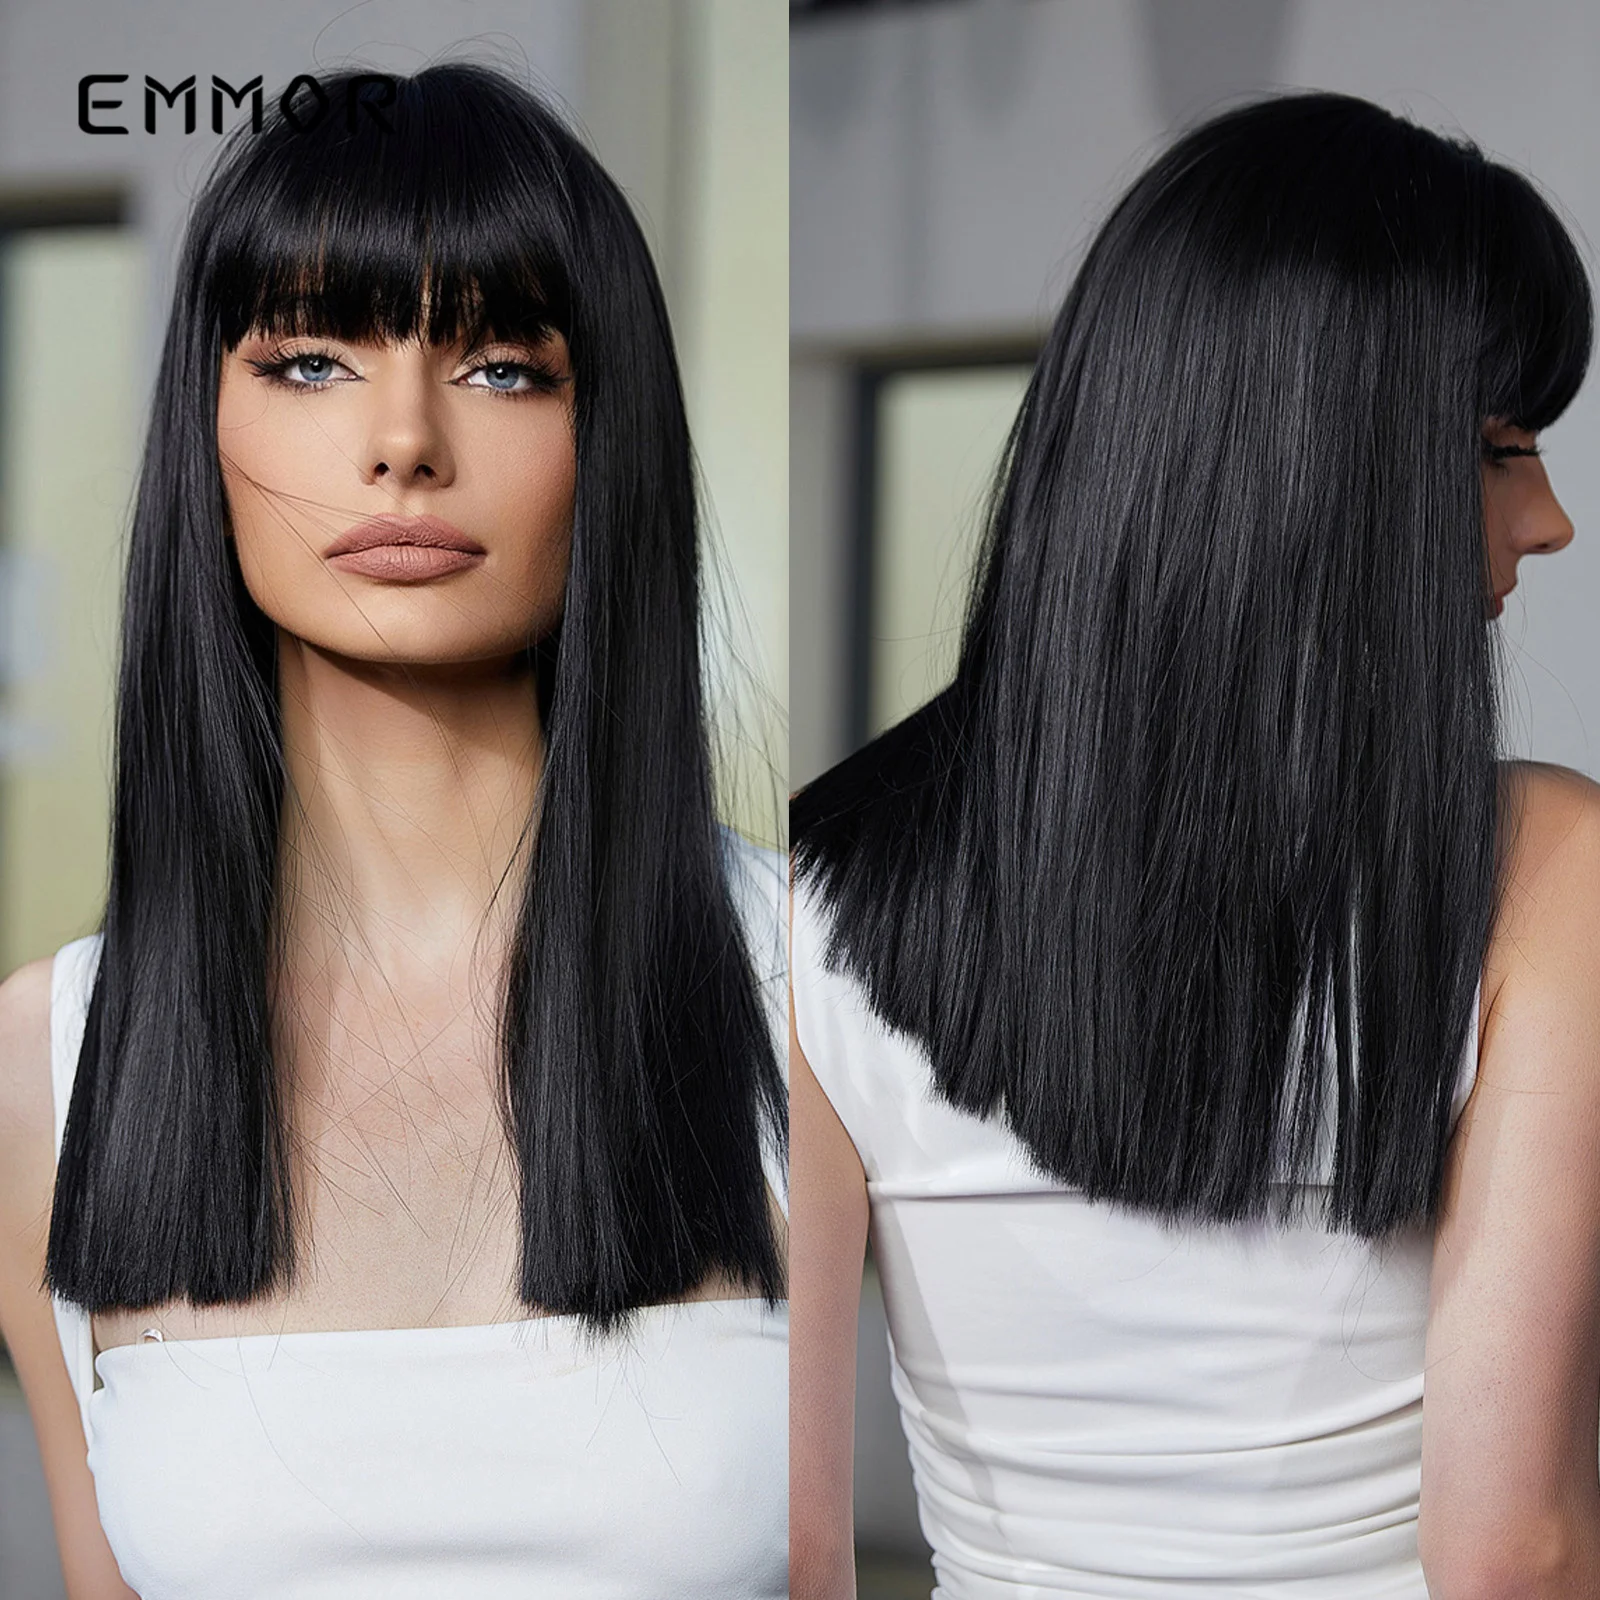 Emmor Black Medium Straight Bob Synthetic Wig with Bangs Cosplay Party Natural Lolita Women Girls Wigs Heat Resistant Fibre Hair